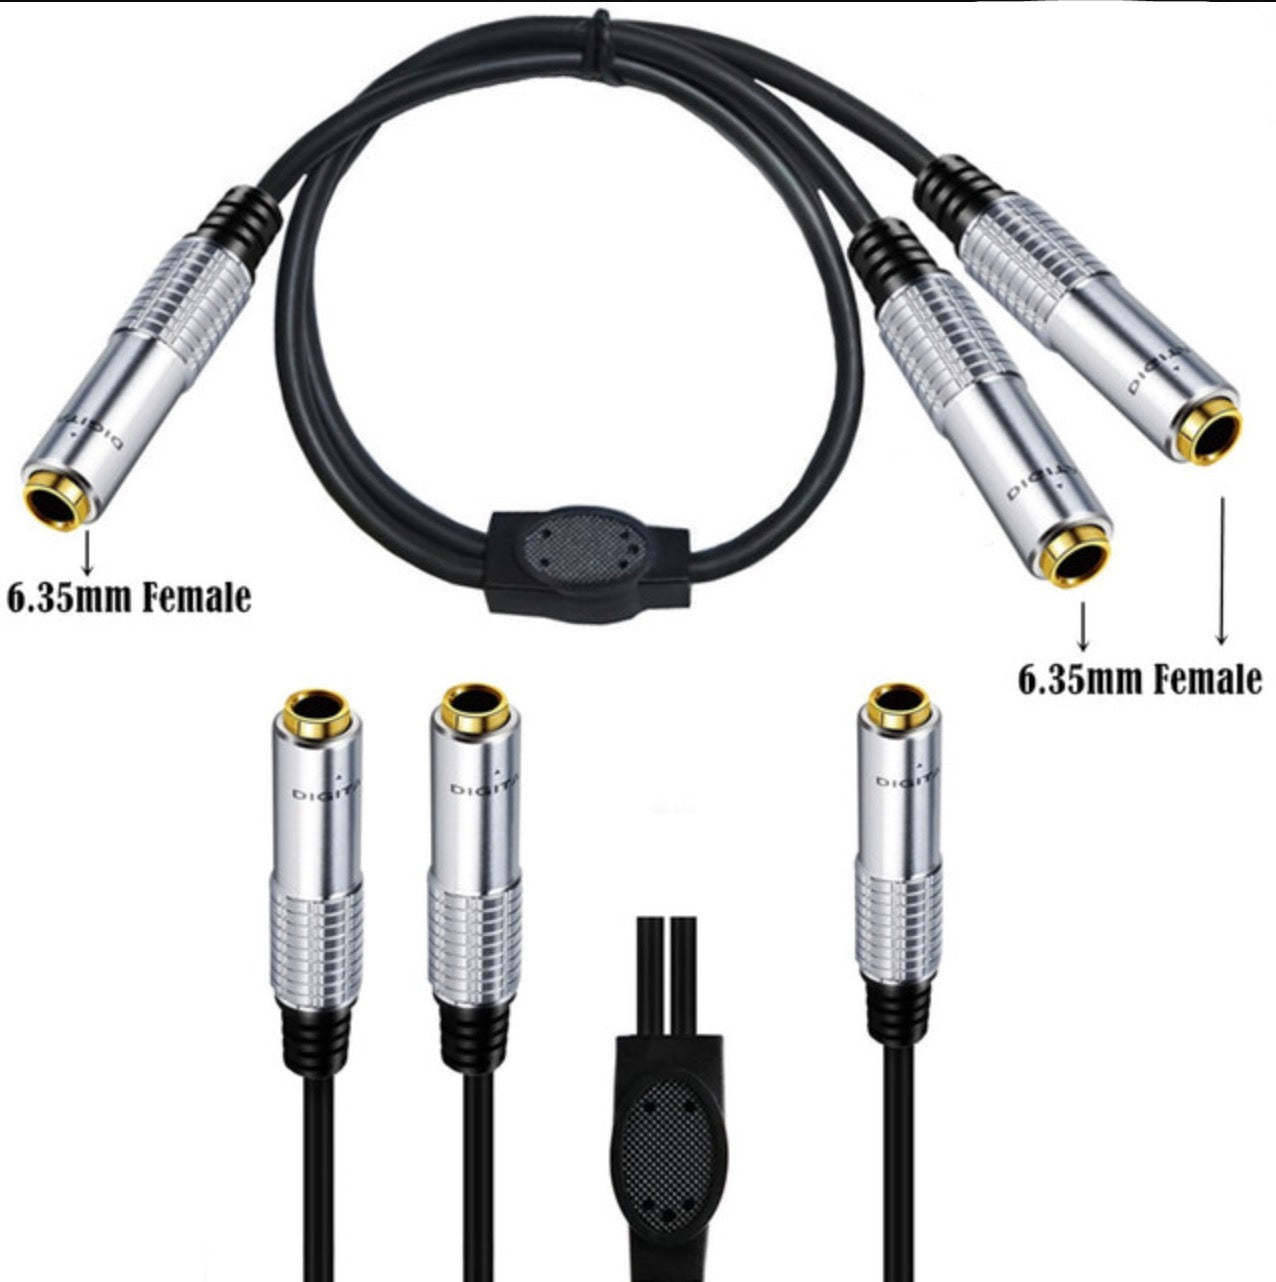 6.35mm Female to Dual 6.35mm 1/4" Female Stereo Audio Speaker Y Splitter Cable 0.5m